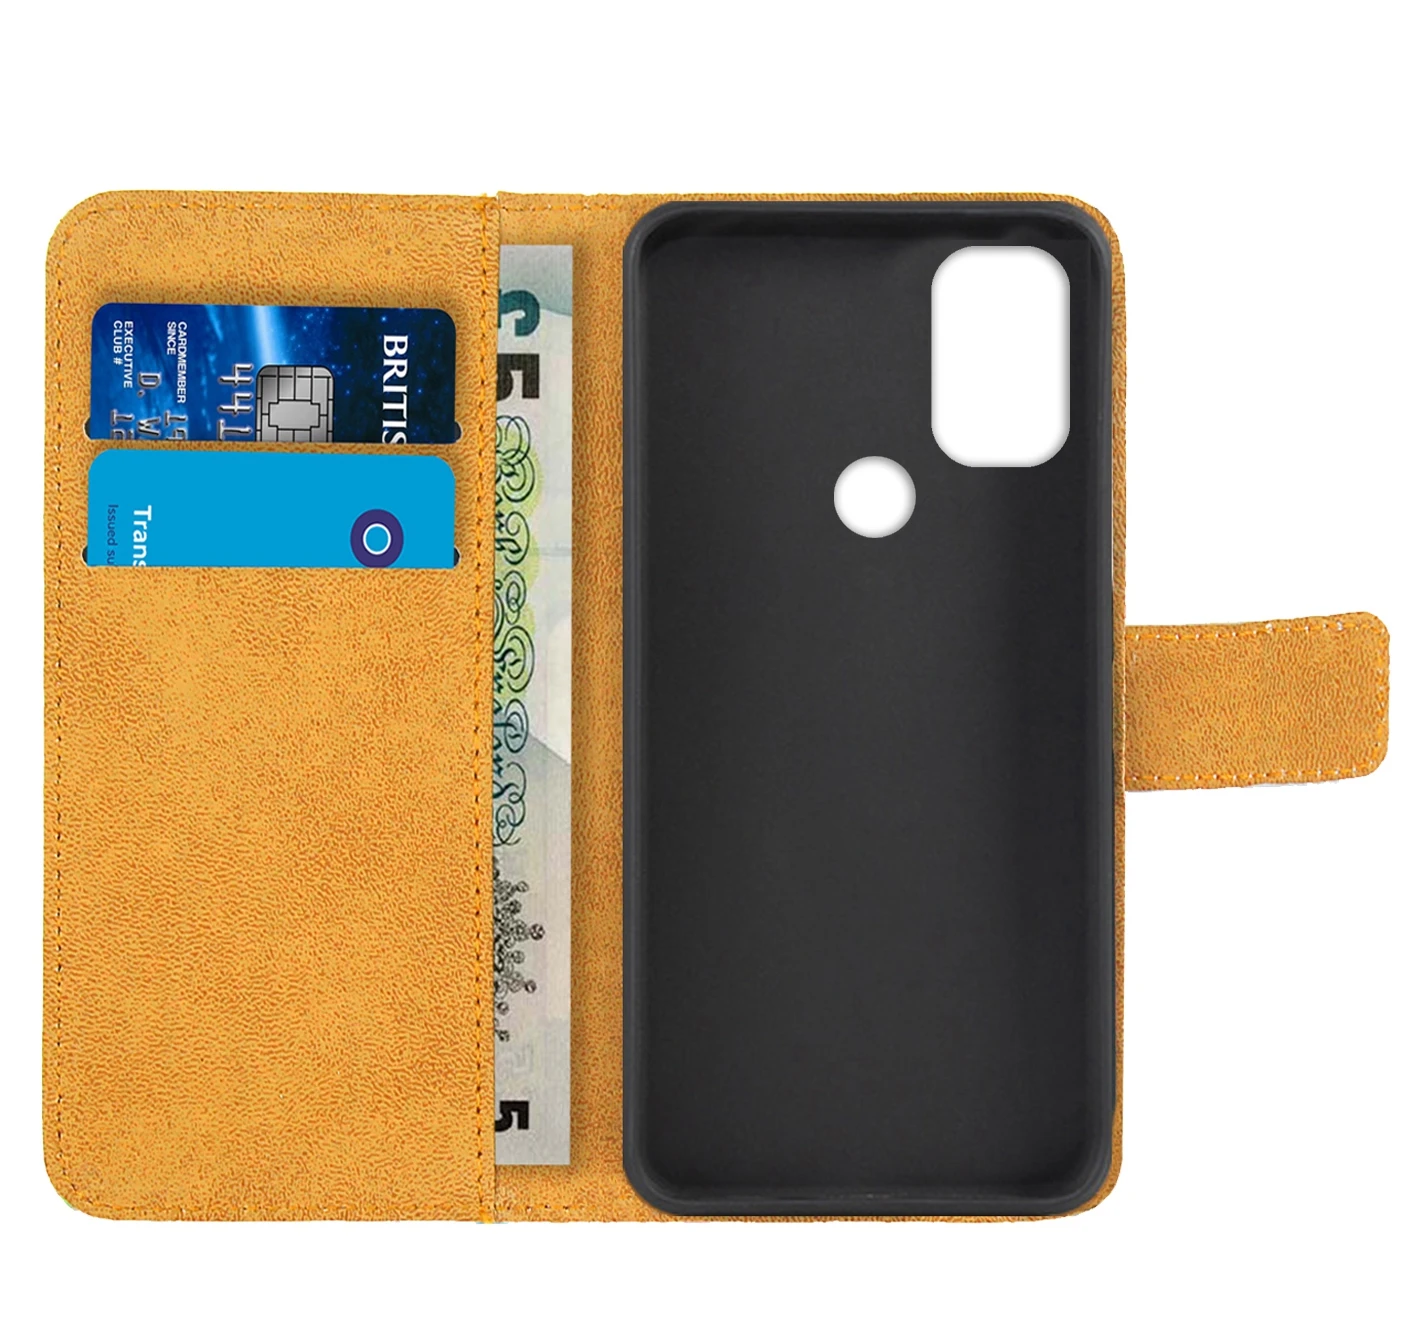 Painted Wallet Case Leather Card Pocket Cover Funda Coque For Samsung Galaxy A01 A02S A10 A10E A10S A11 A12 A2 Core A20E A20S cute samsung phone case